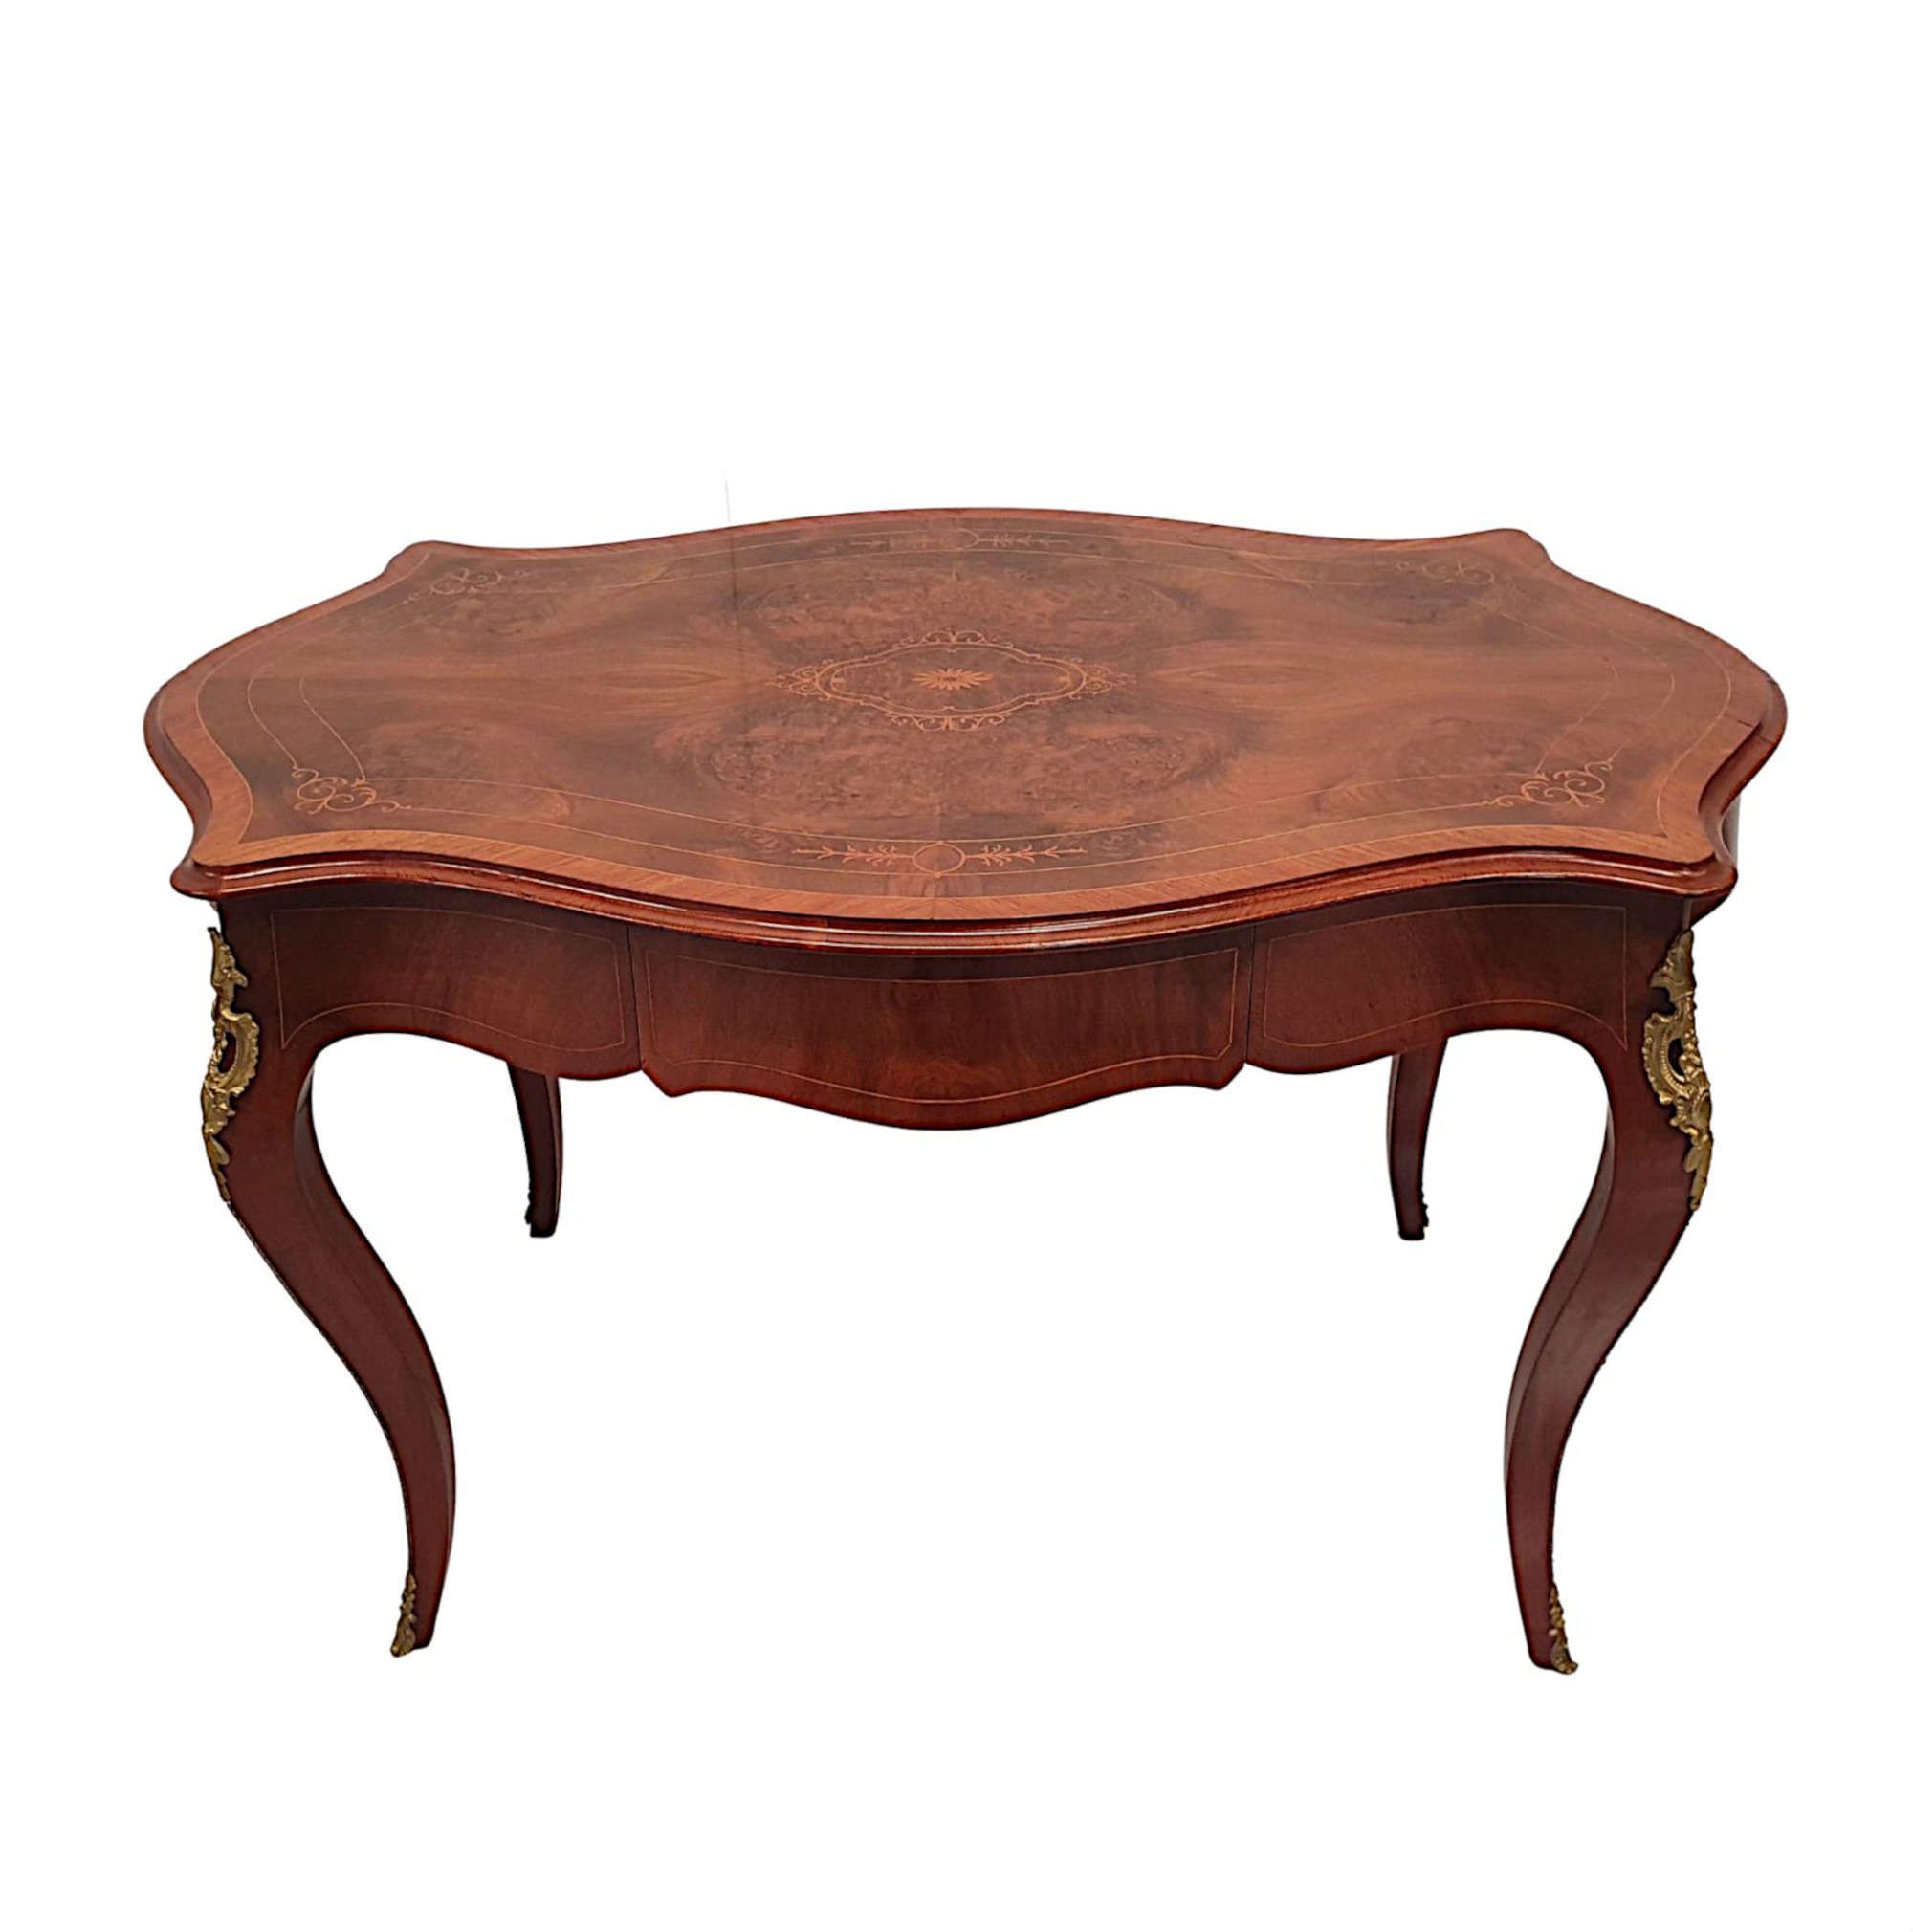 A Fabulous 19th Century Antique Side Table Or Desk